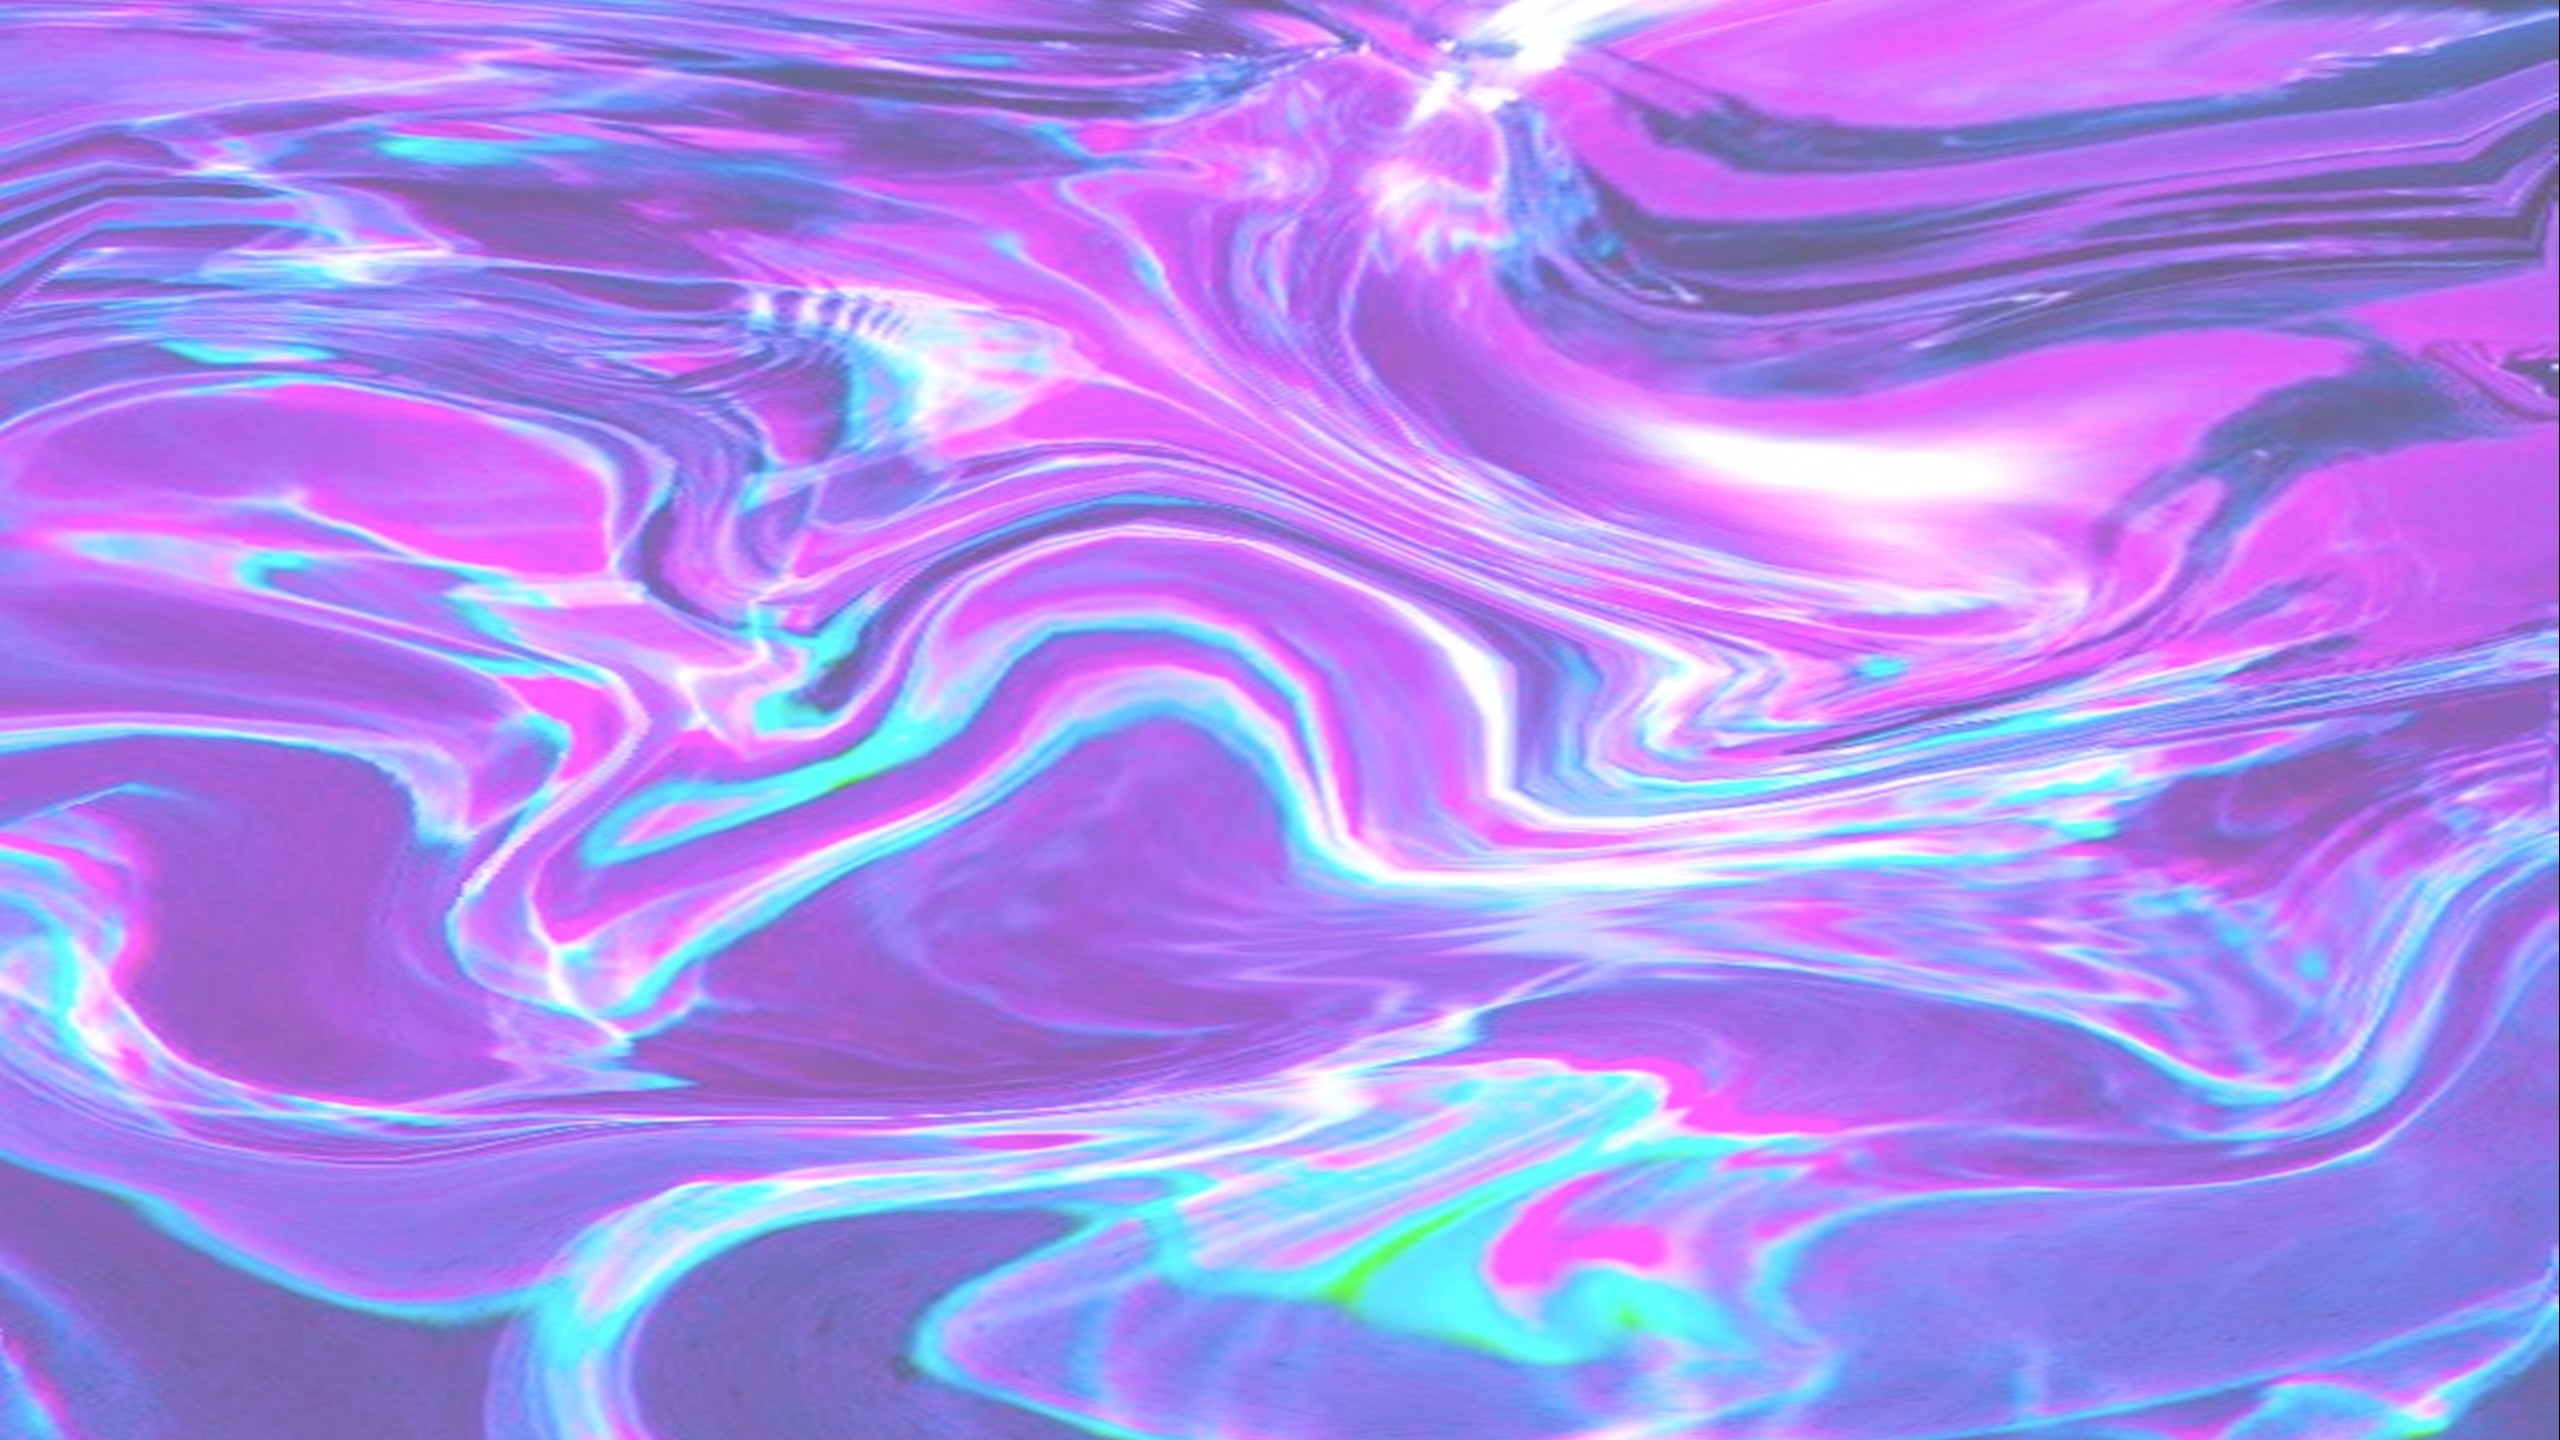 Holographic Wallpaper 54 Pictures HD Wallpapers Download Free Map Images Wallpaper [wallpaper376.blogspot.com]